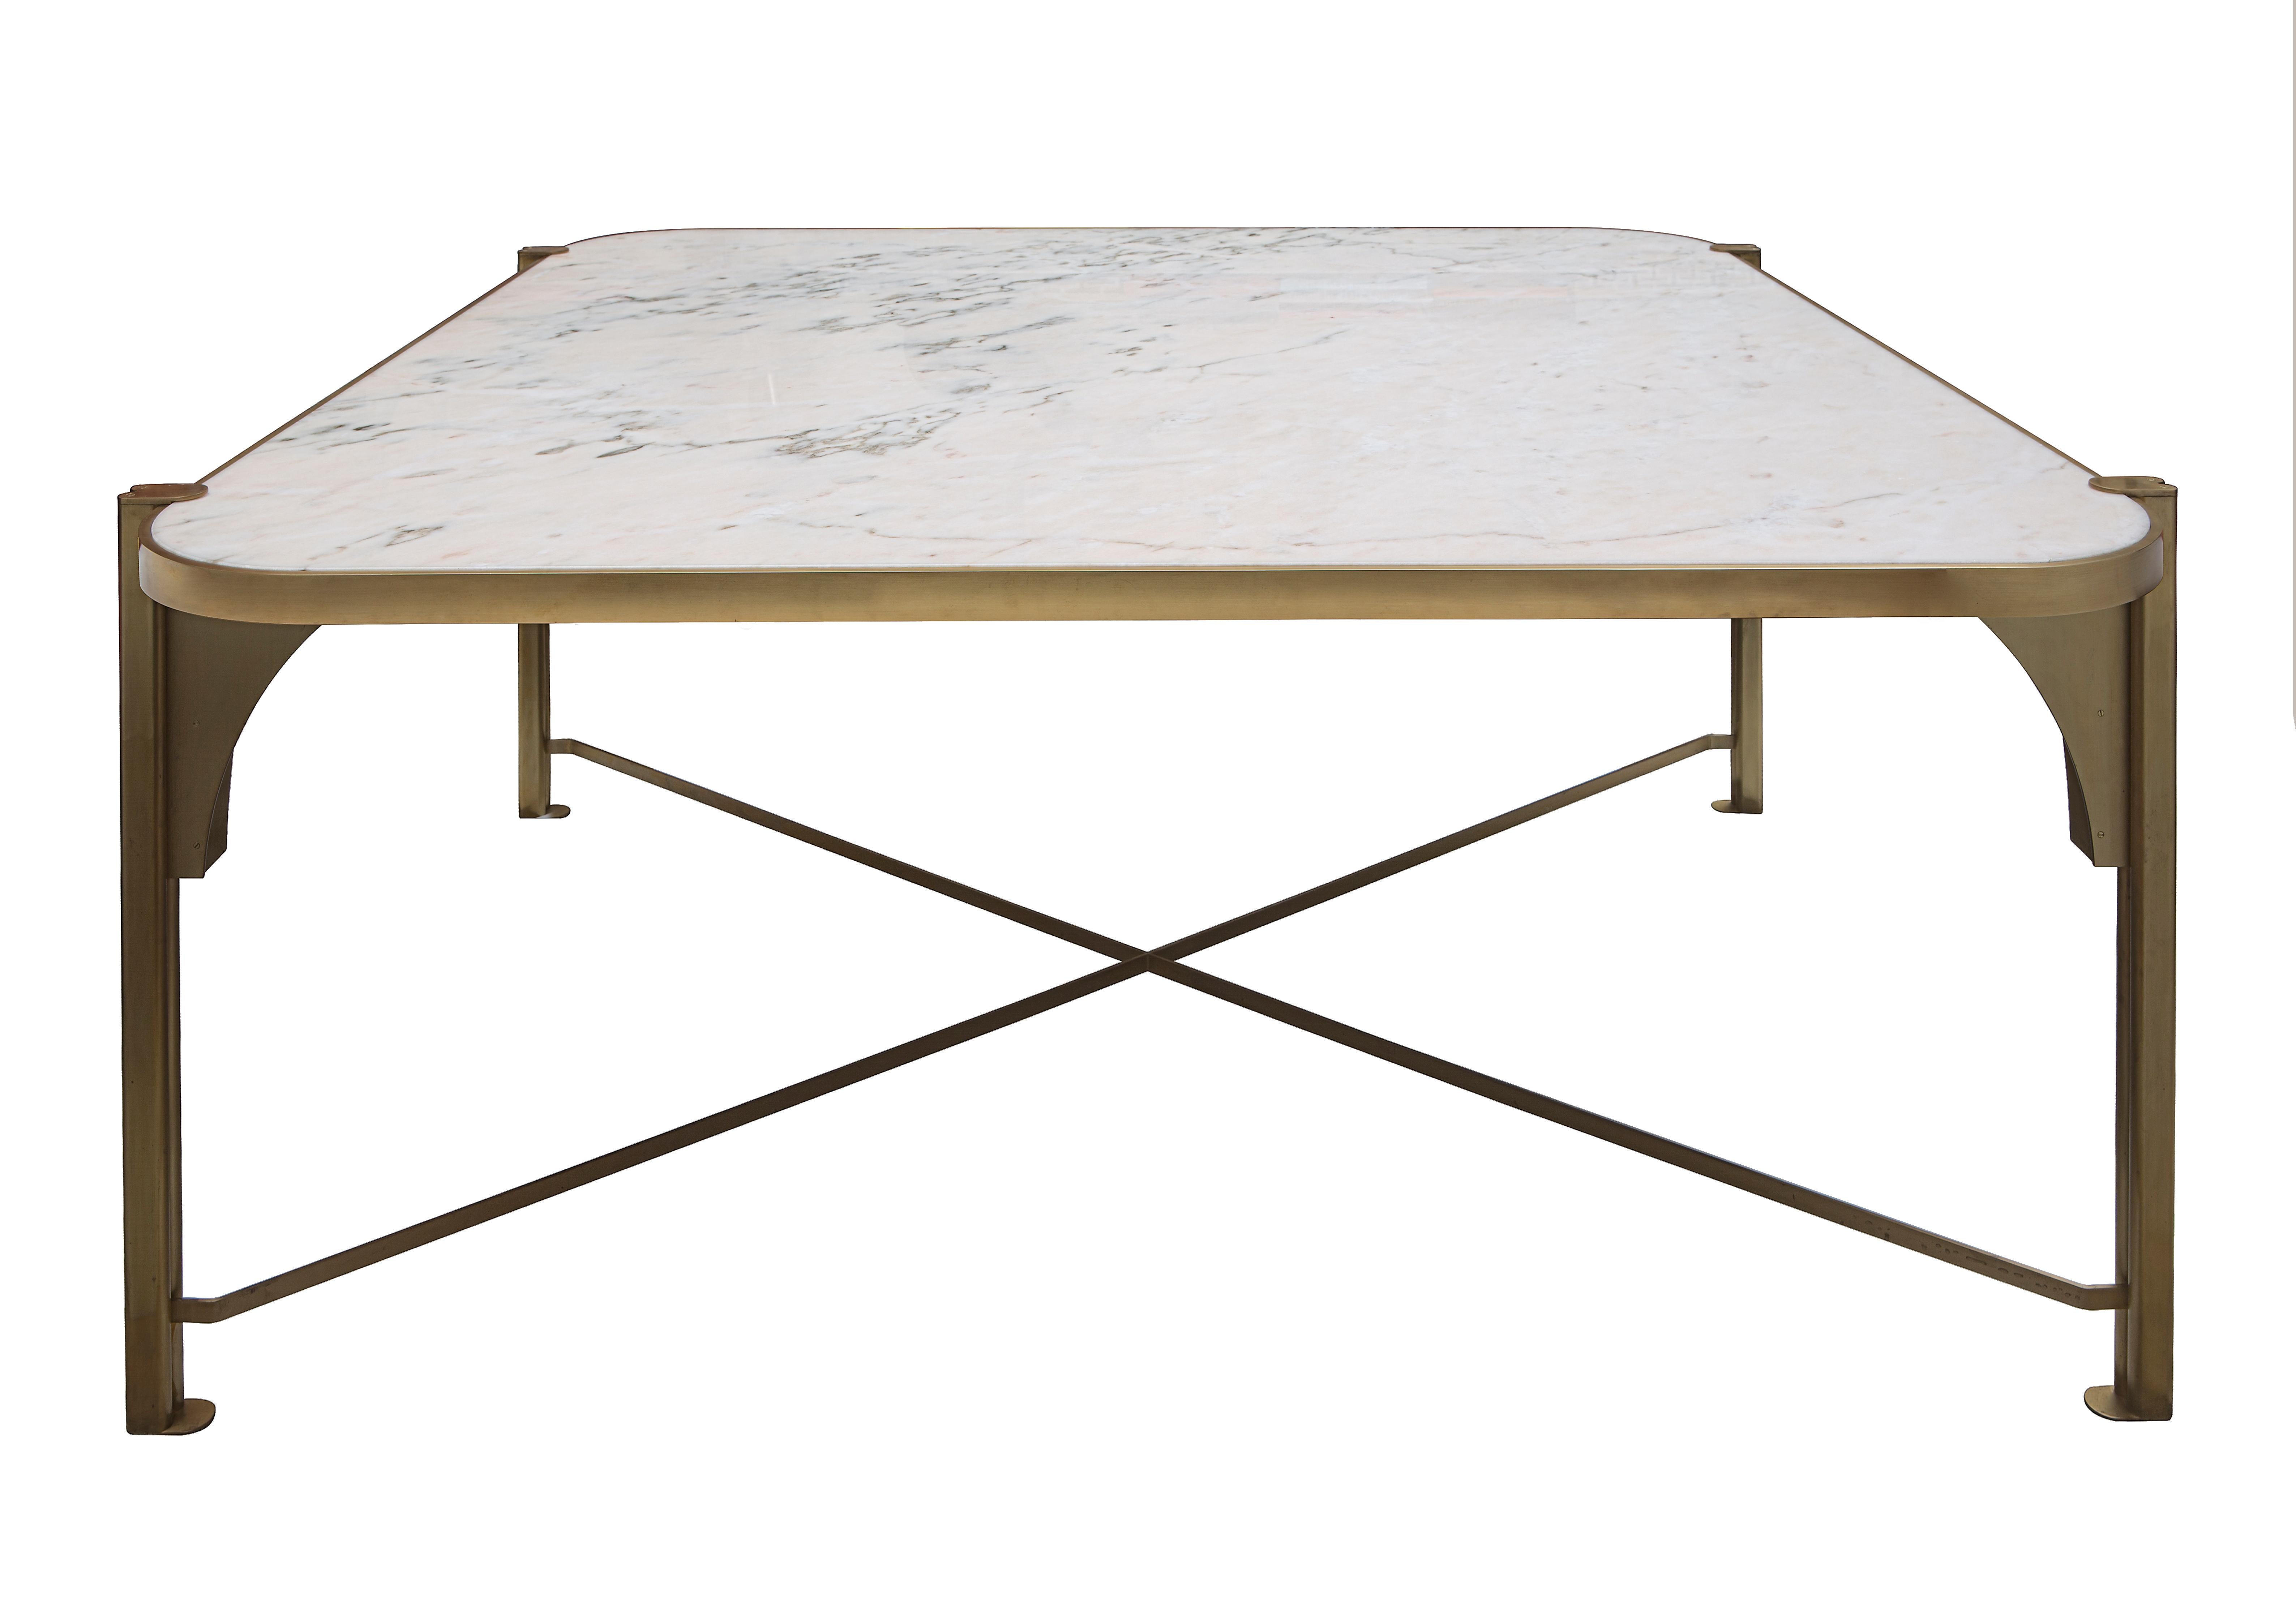 Inspired by the nostalgia for the romance-filled Los Angeles landscape of the '30s and its sophisticated luxury, this coffee table has an elegant and timeless design that will add charm and luxury to any decor. Its frame is in brass and its simple